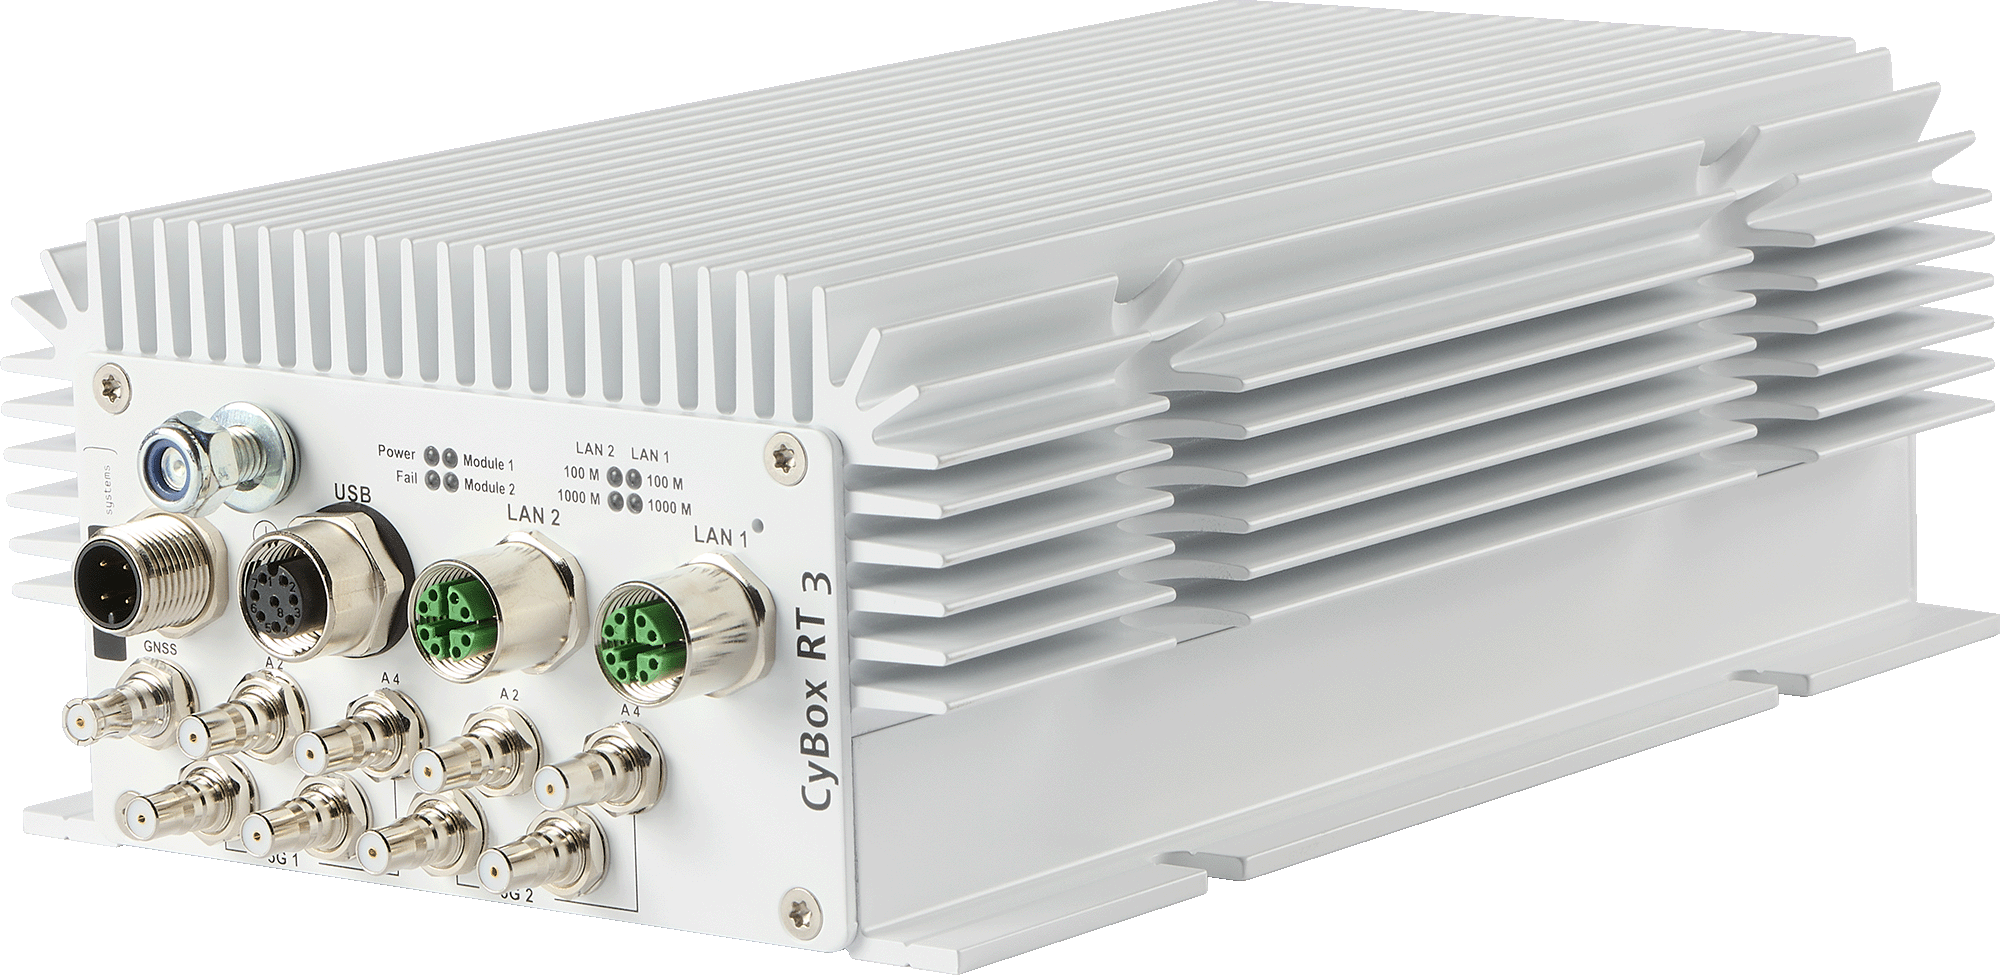 ELTEC Router for Train-to-Ground Communication